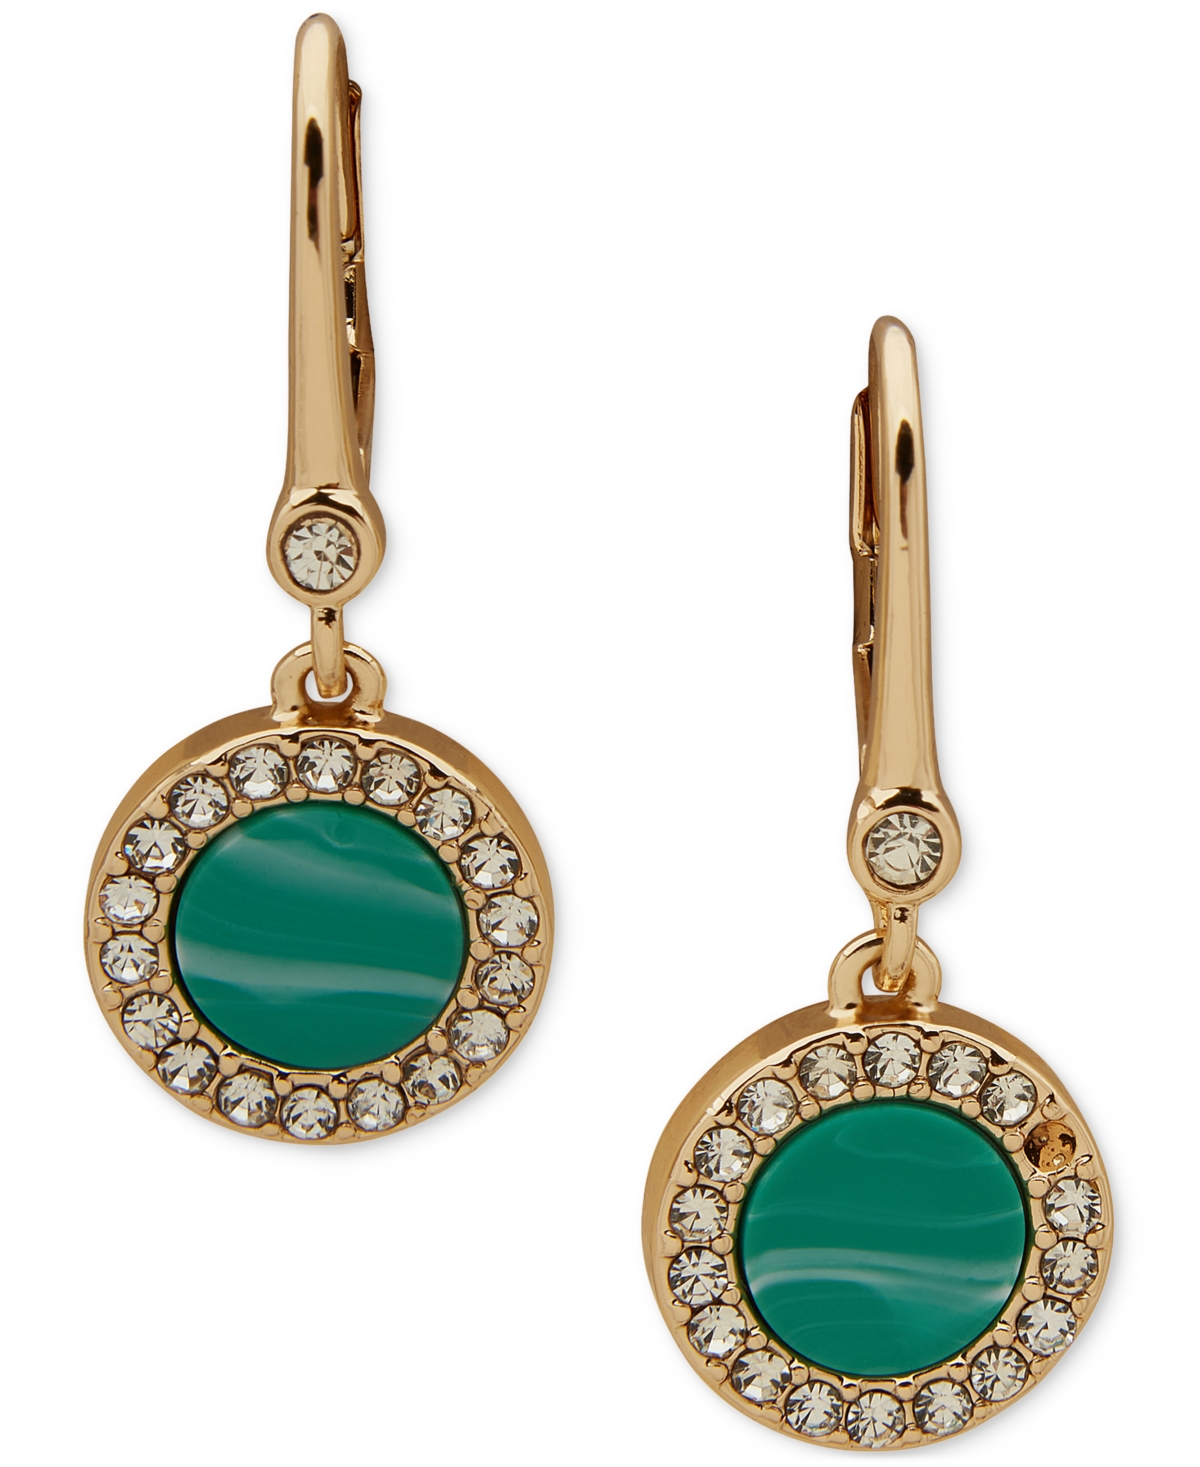 Gold-Tone Pave & Color Inlay Drop Earrings - Turquoise